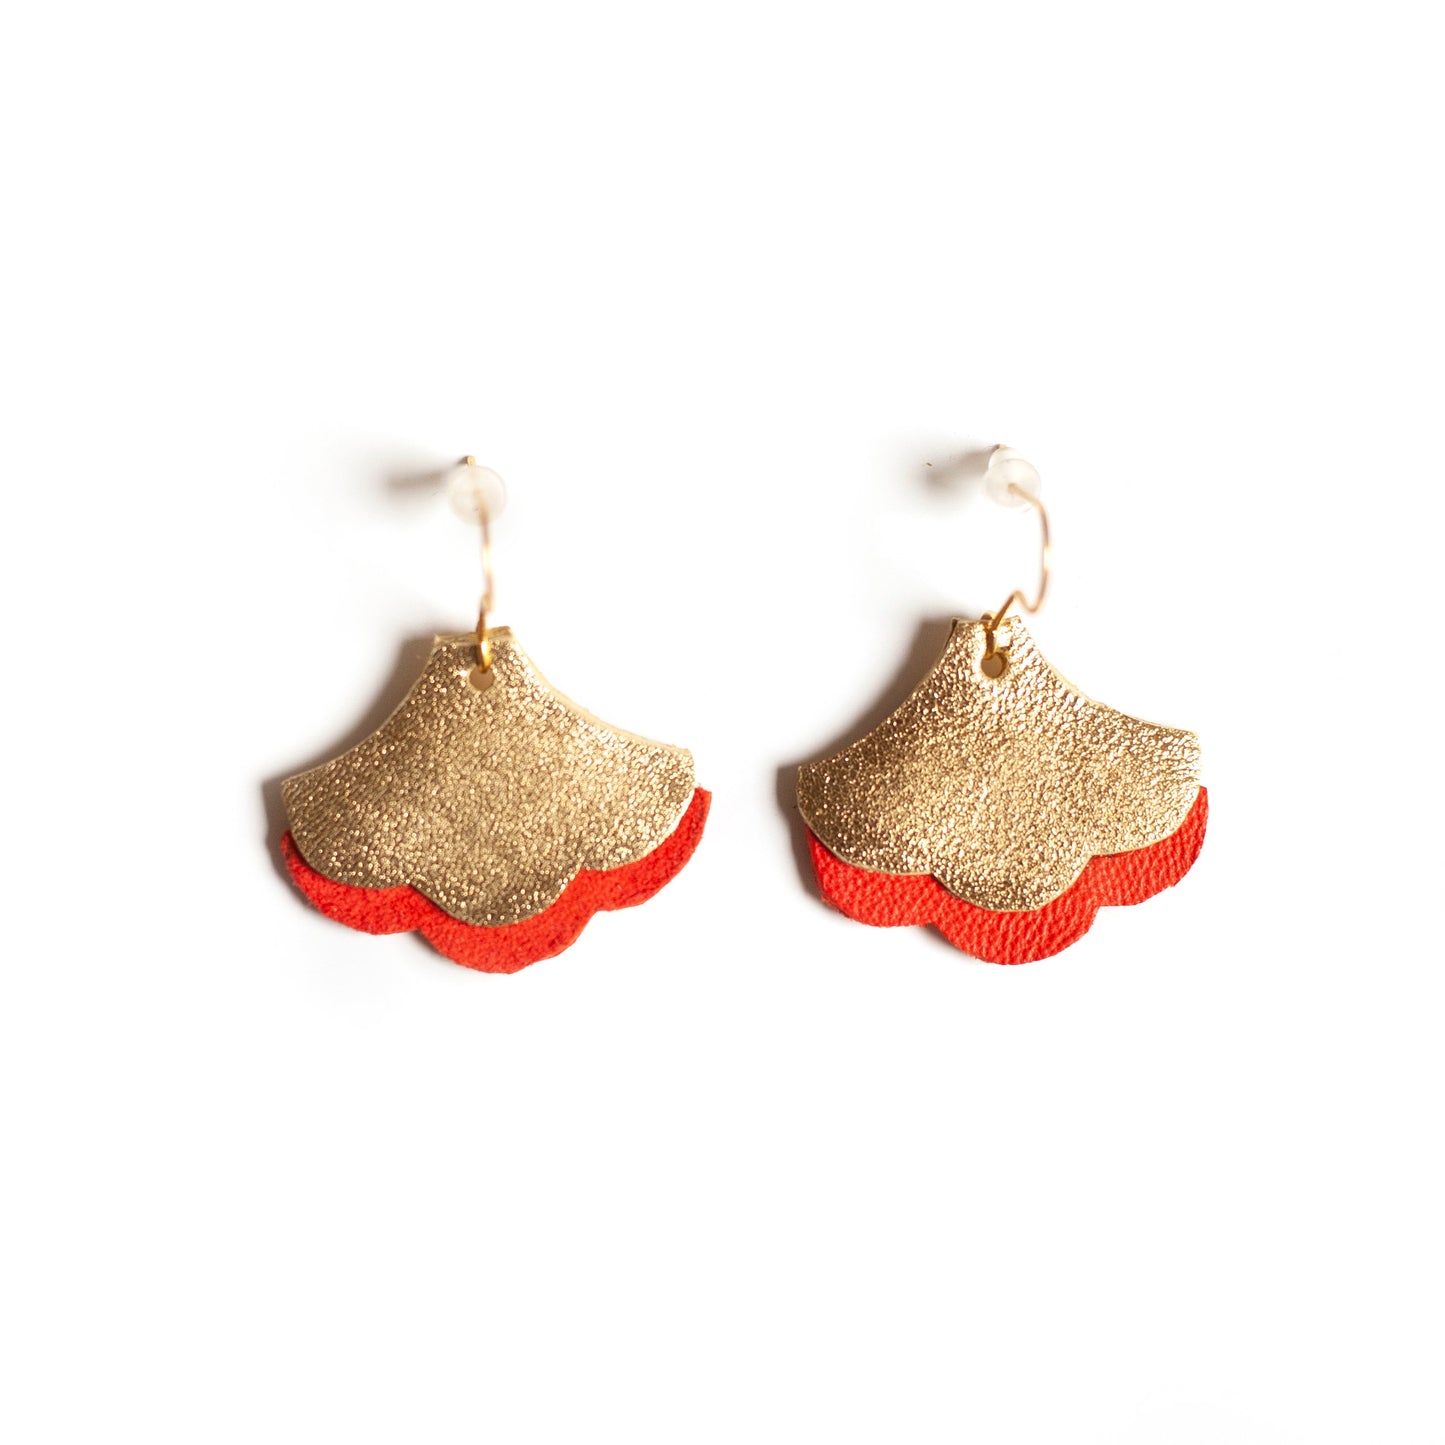 Ginkgo Biloba earrings in red and gold leather